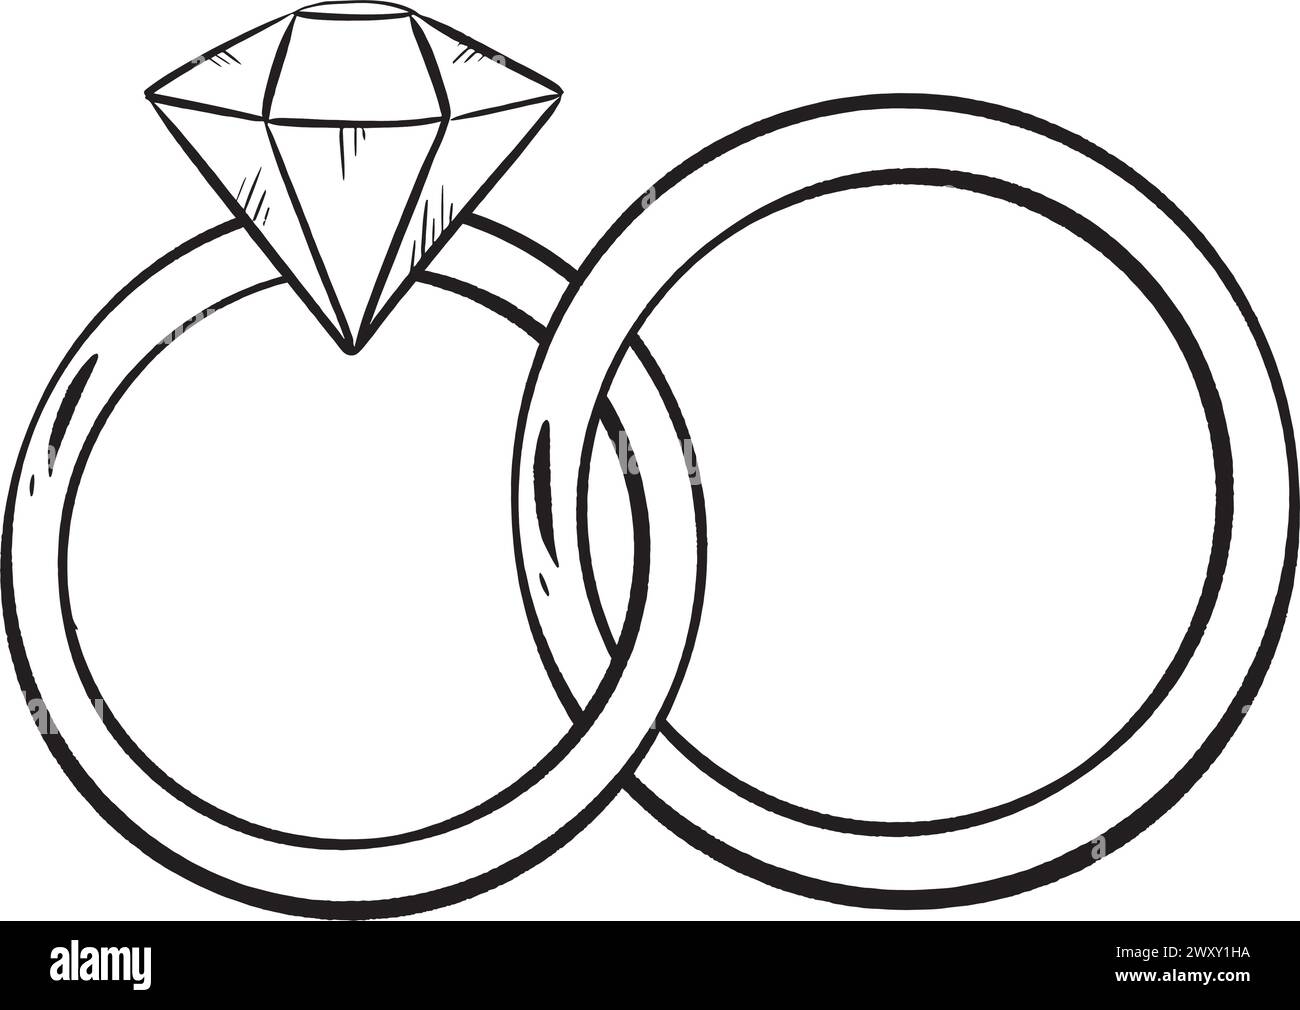 Artistic black and white drawing of two wedding rings with a diamond centerpiece Stock Vector